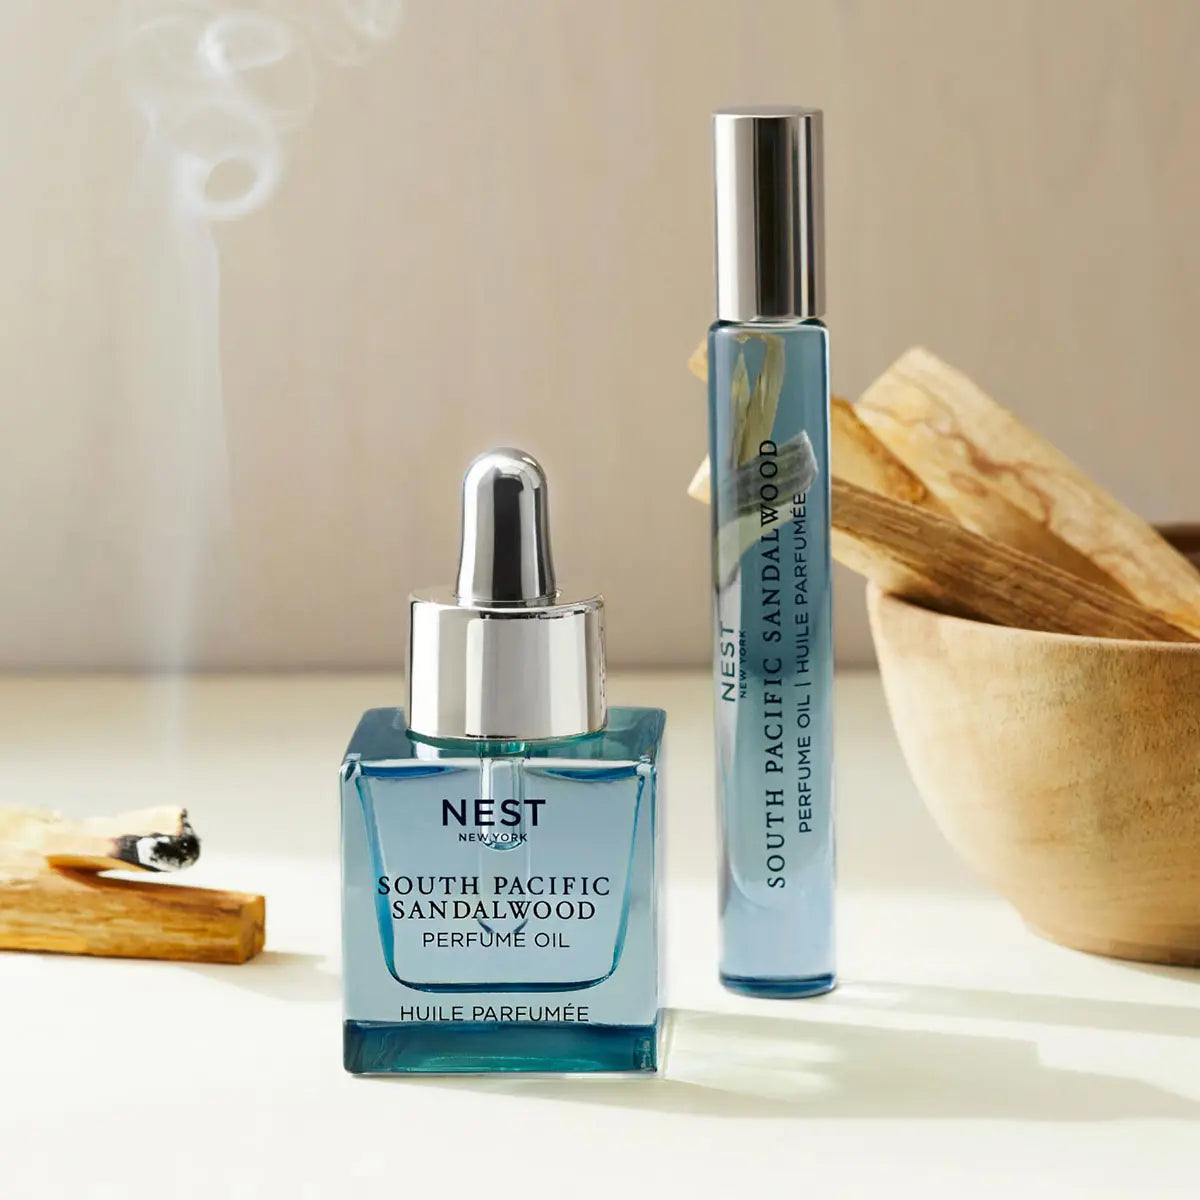 Nest Perfume Oil 30mL/1.0 fl oz. and Rollerball 6mL/0.2 fl oz. in South Pacific Sandalwood in a room with a diffuser